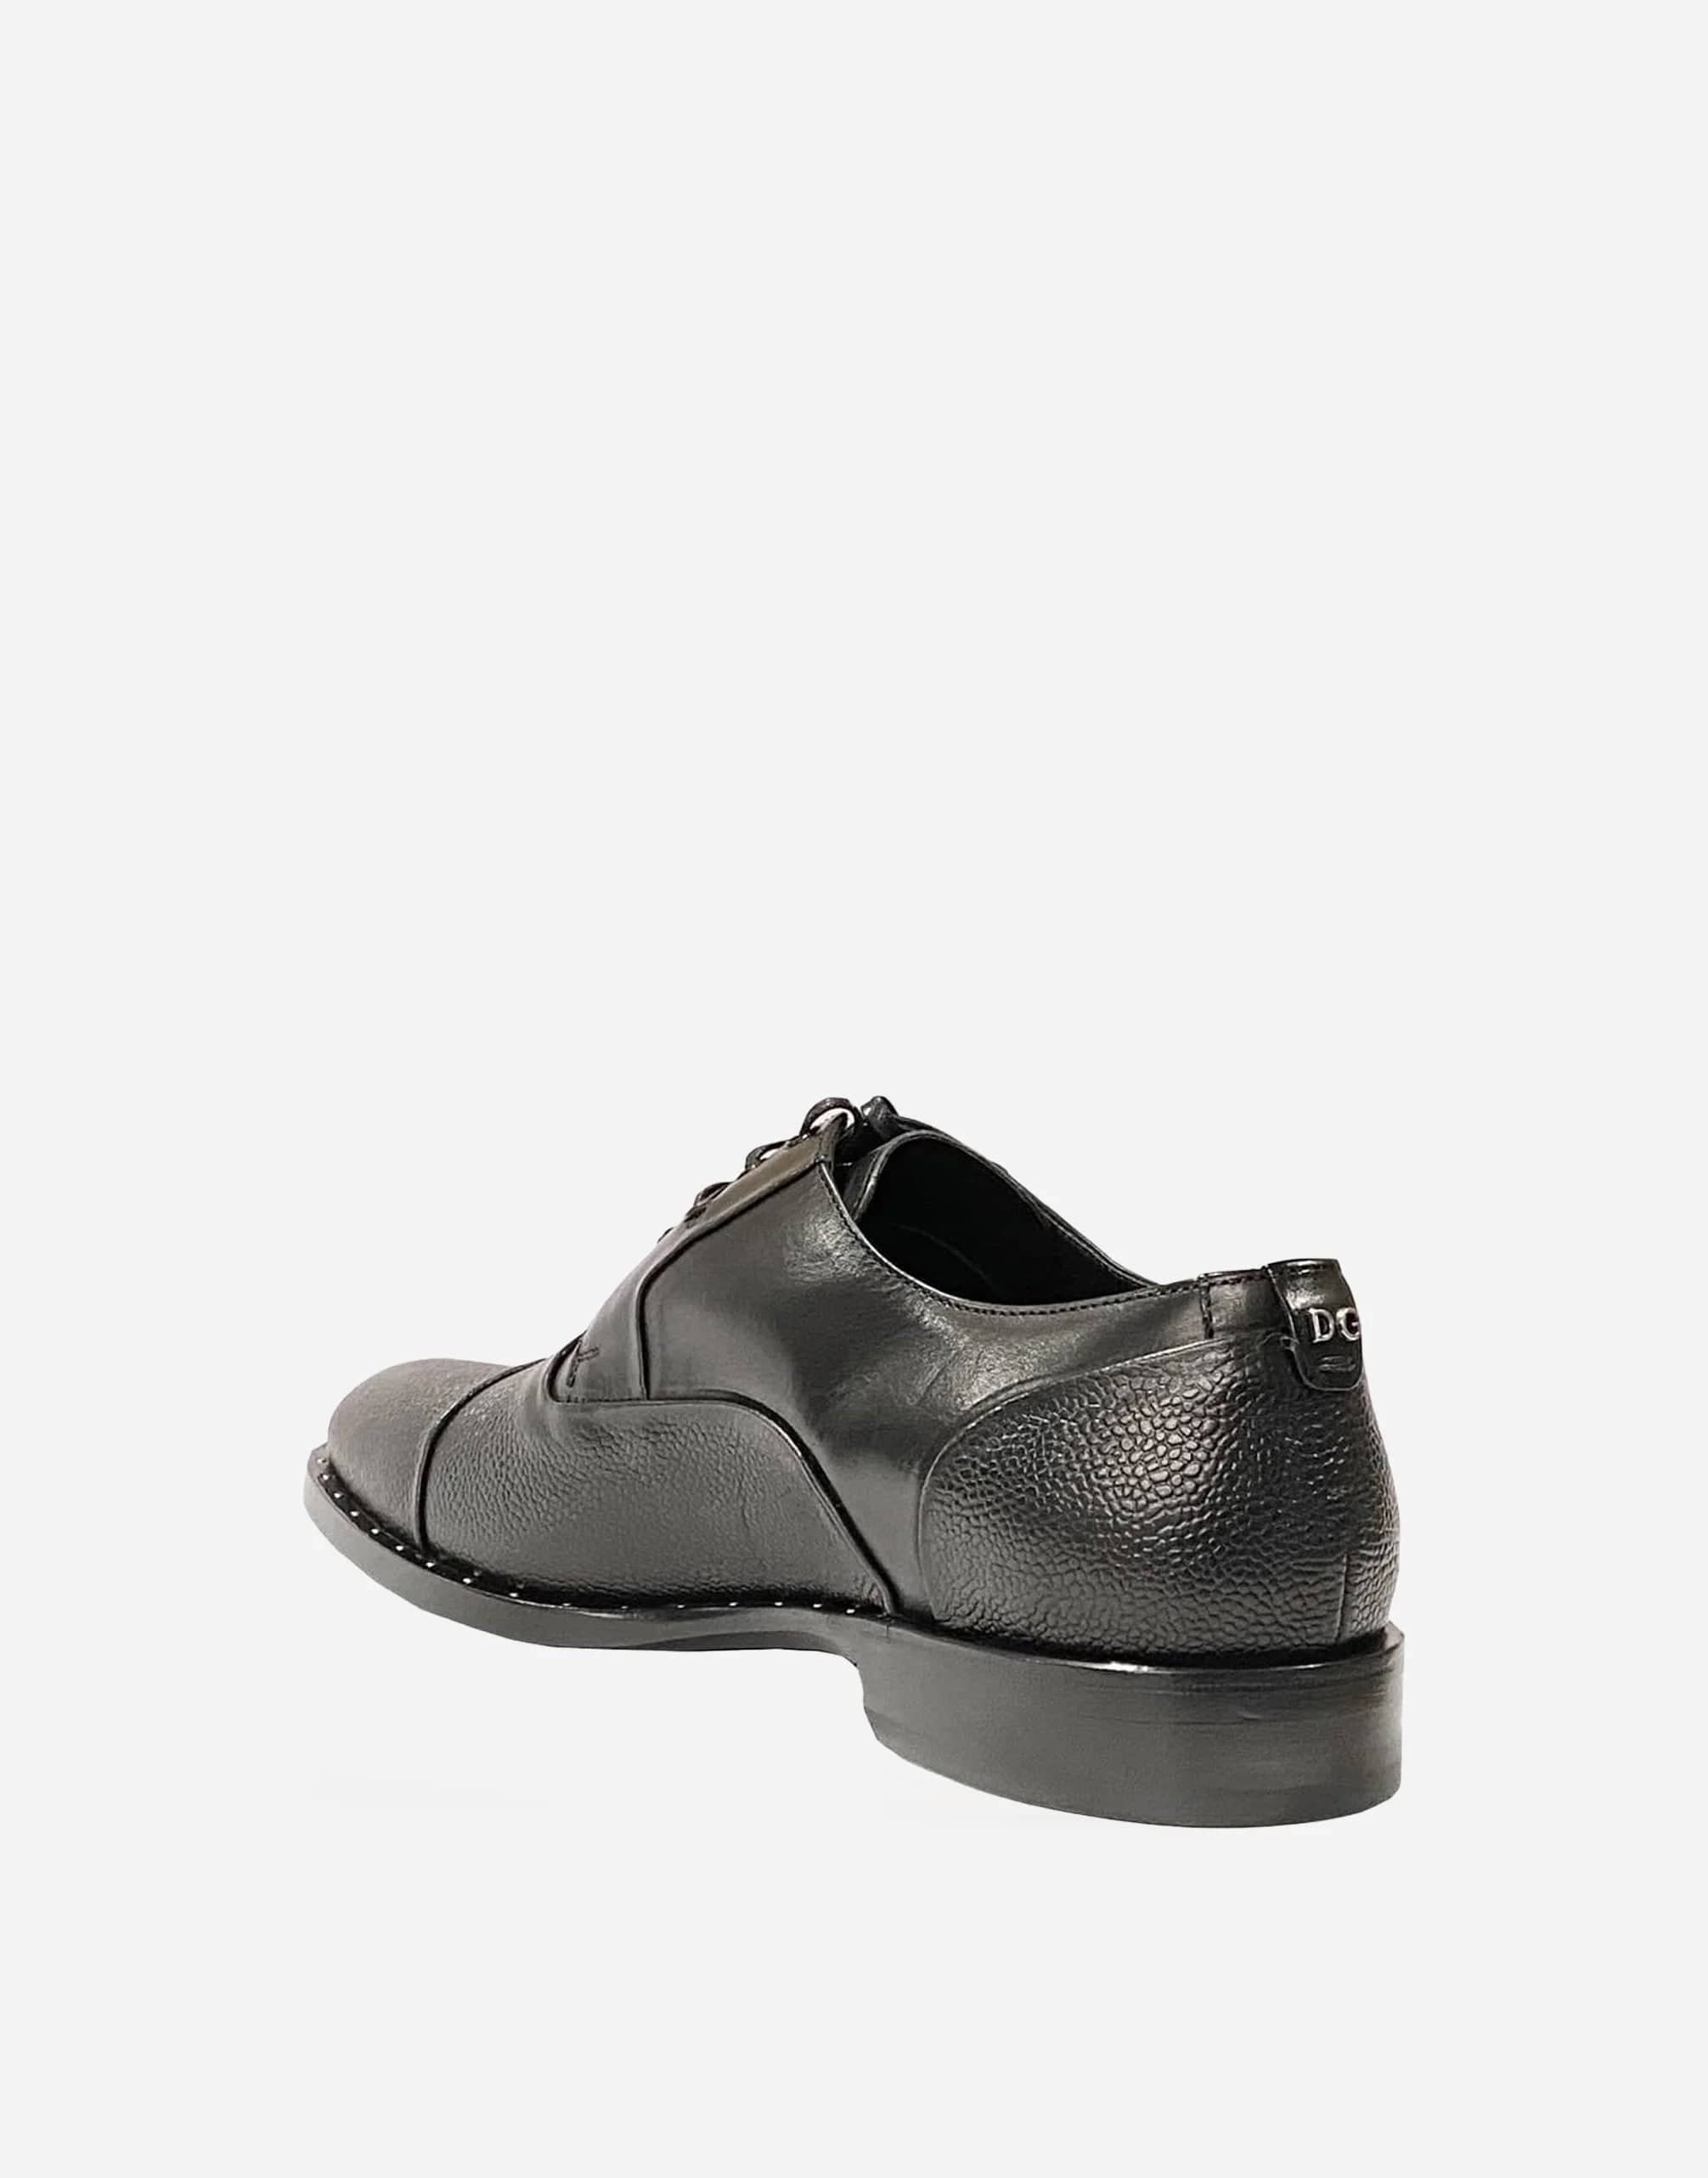 Dolce & Gabbana Lace-Up Derby Shoes